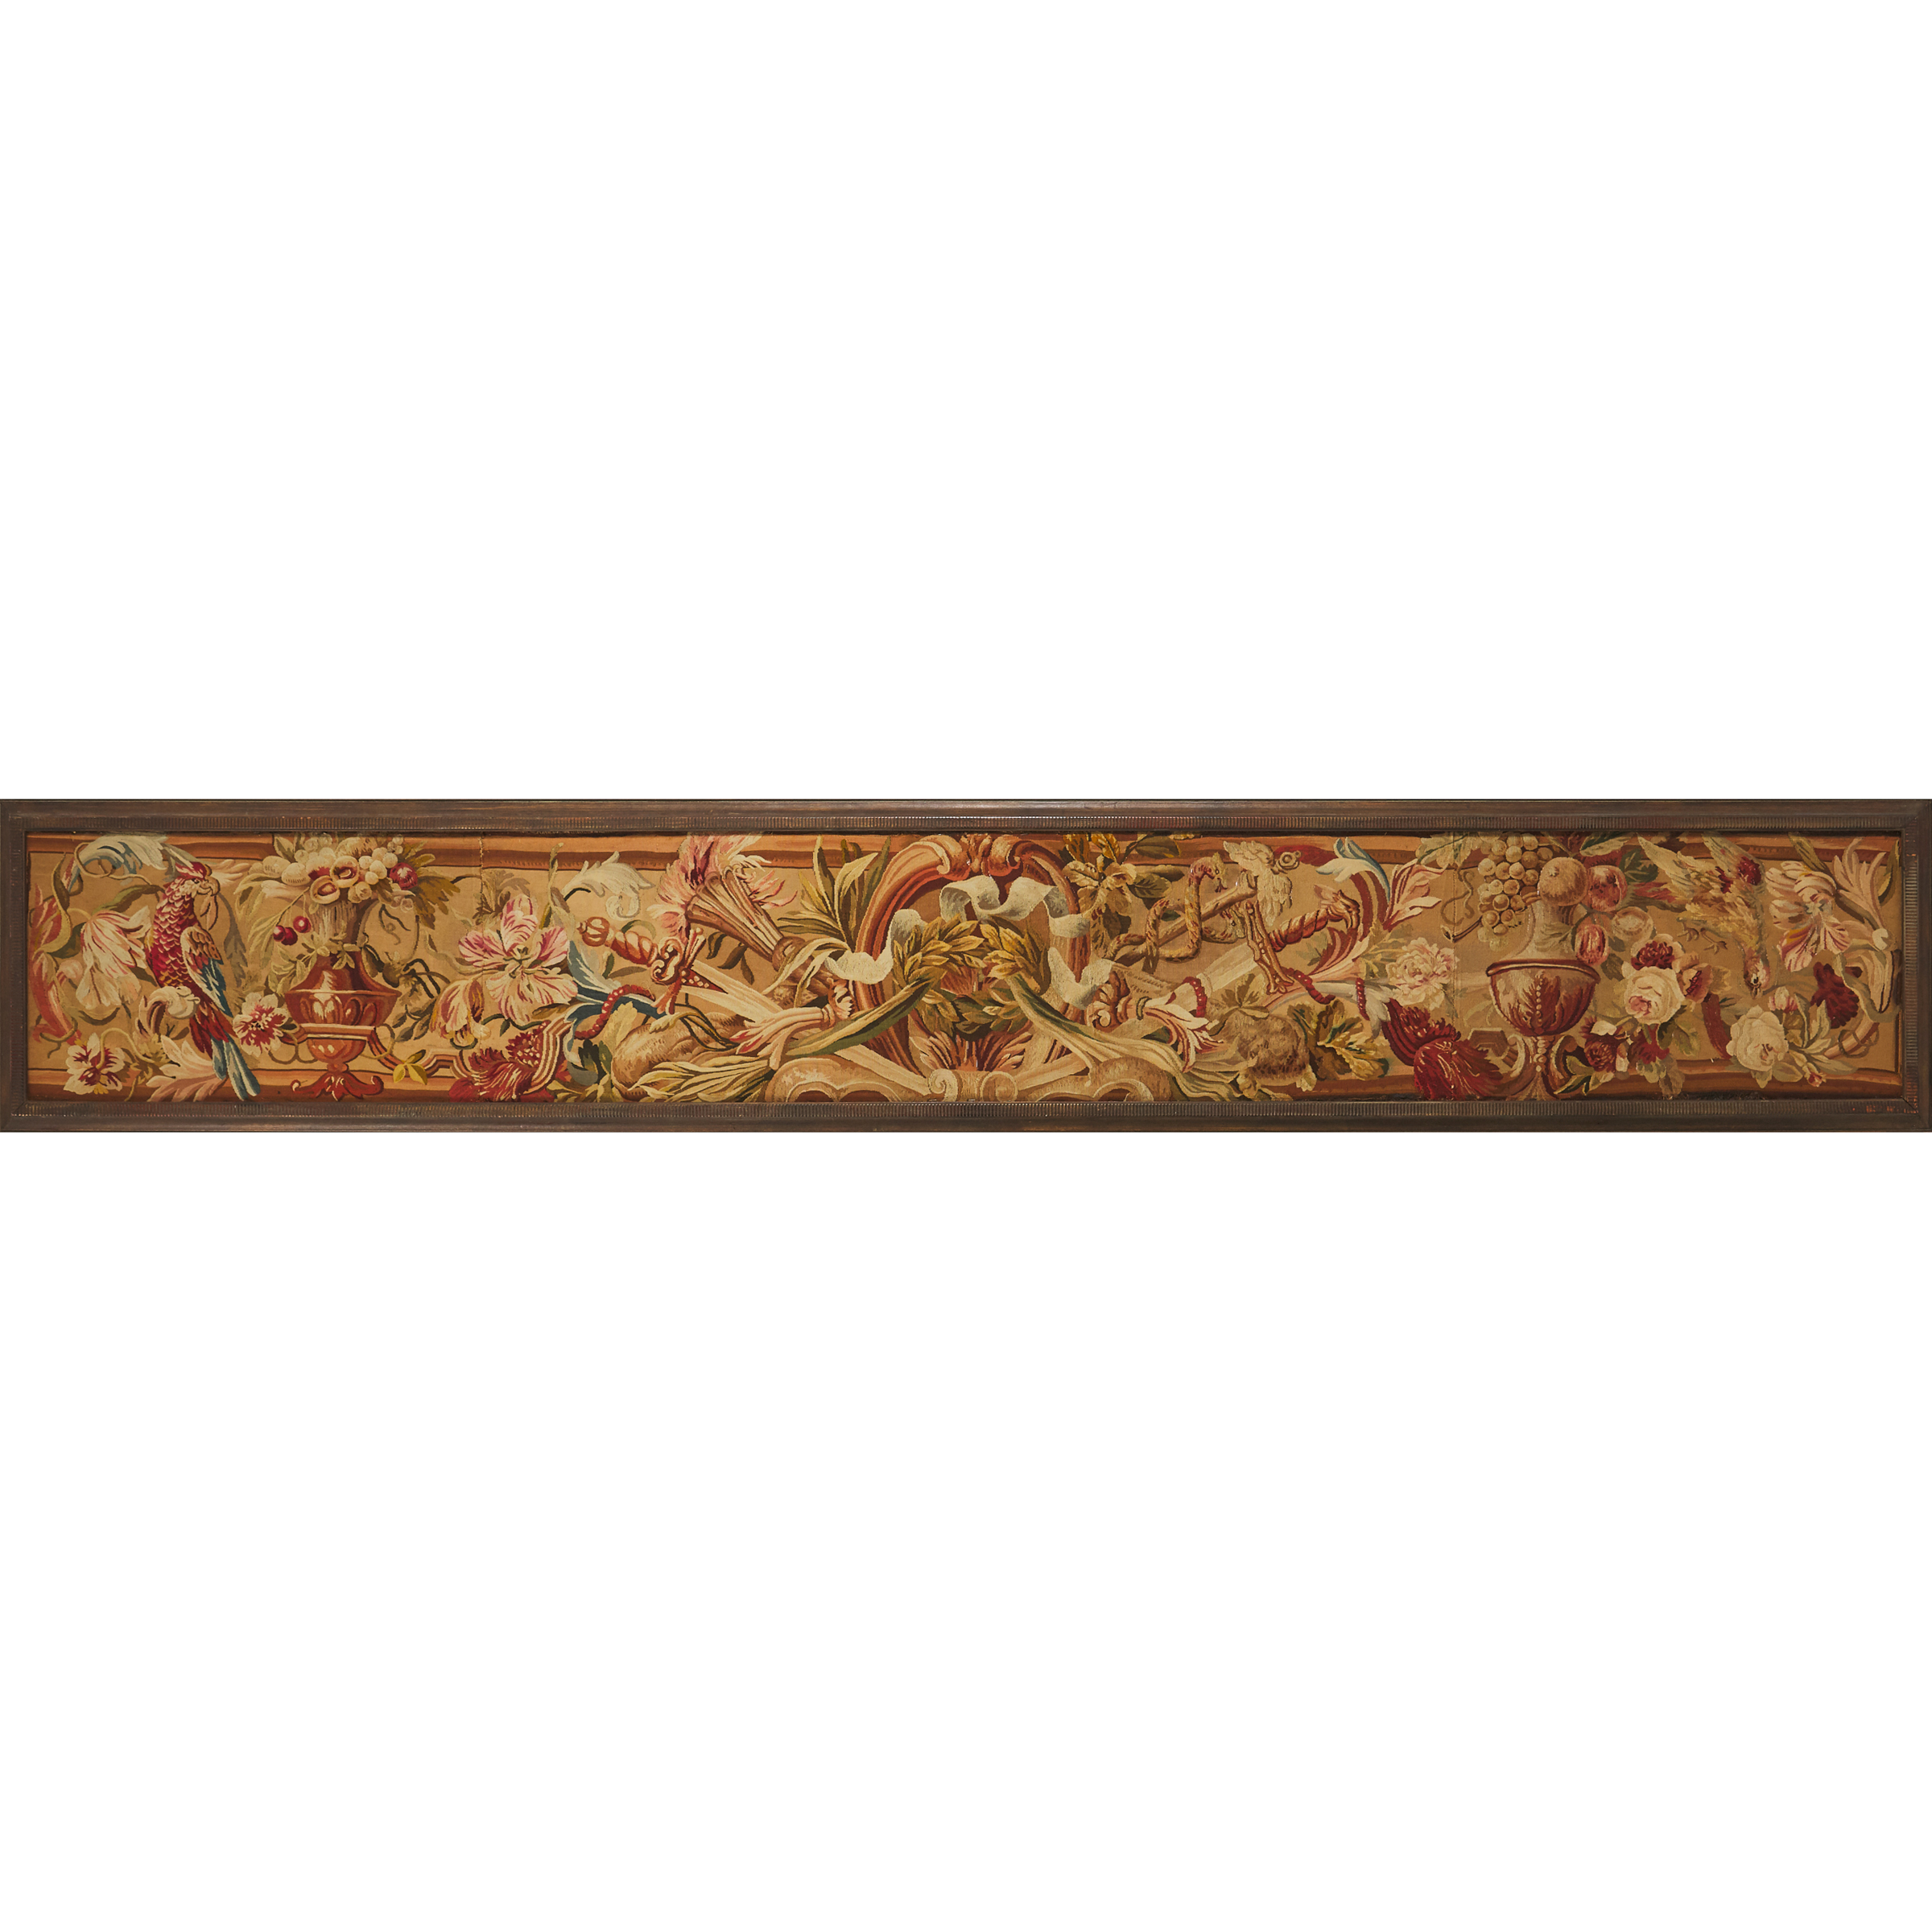 Large French Tapestry Border Fragment Panel, early 19th century